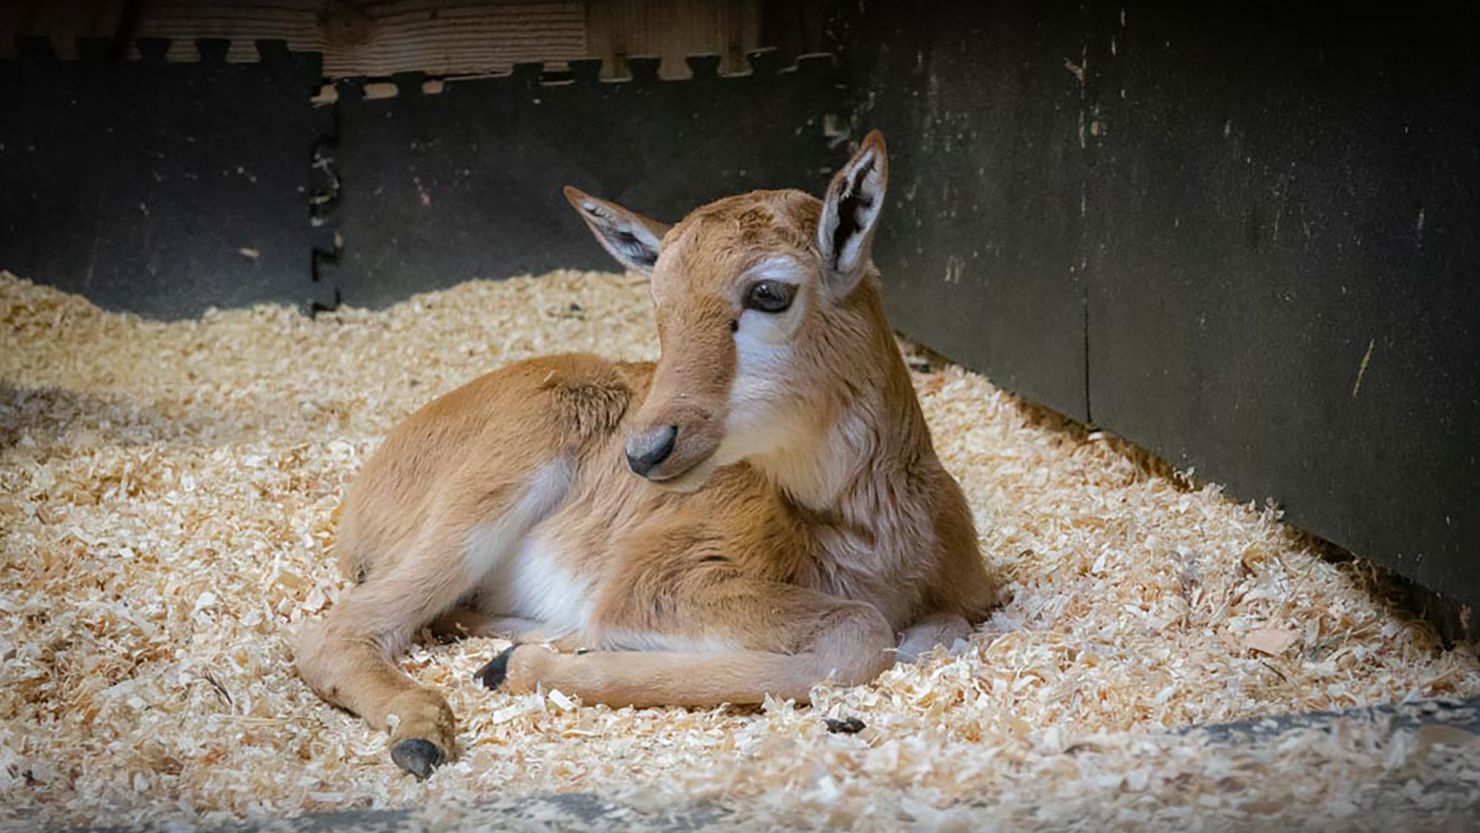 A five-day-old African bontebok calf is seen at the Oregon Zoo. He was born on April 1 to Winter, an 8-year-old bontebok in the zoo's Africa savanna area.